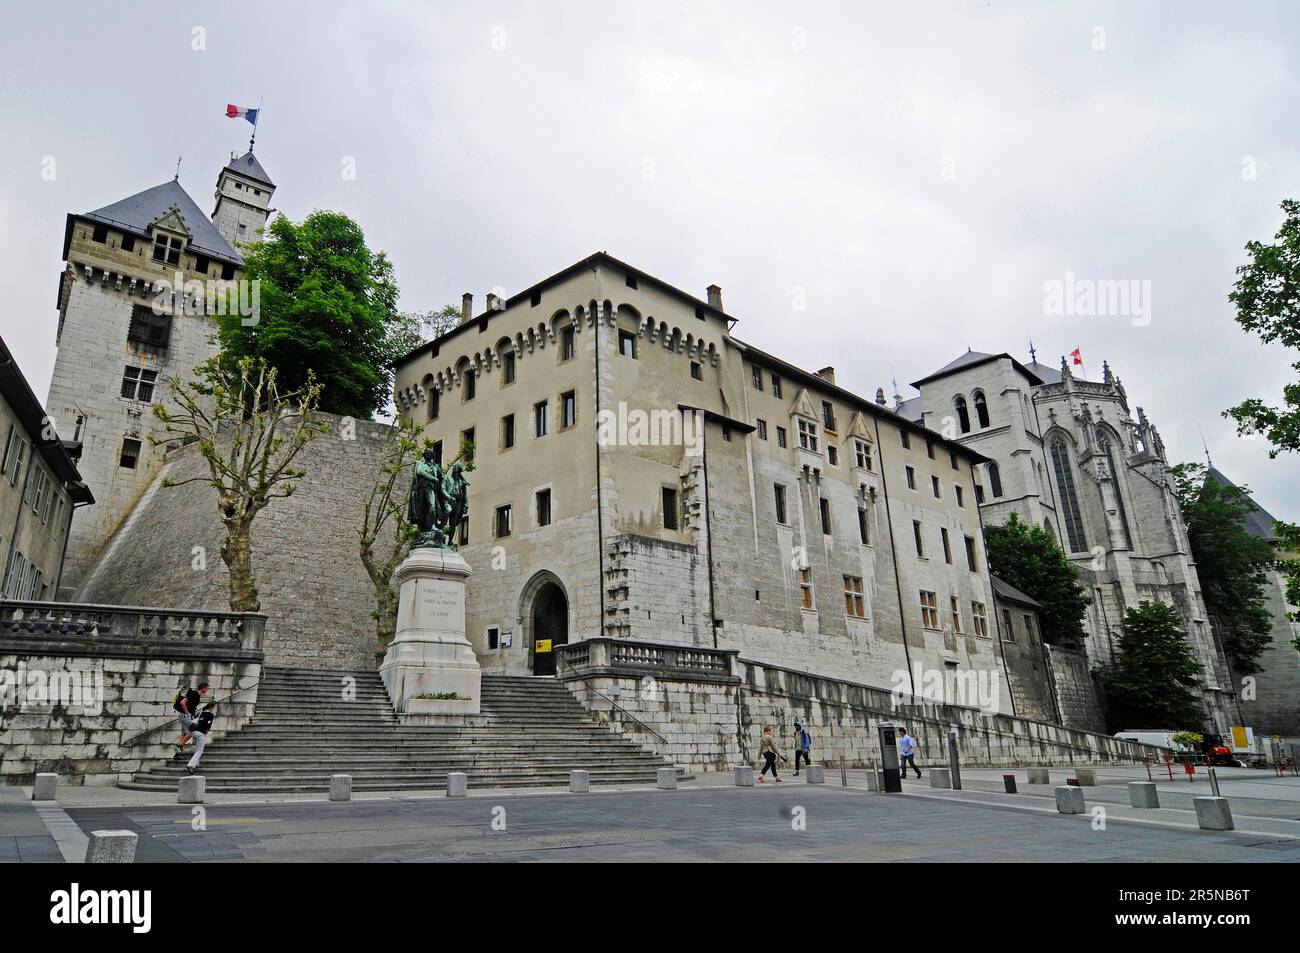 Monument to Joseph and Xavier de Maistre, Chateau, Chambery Castle, former residence of the Dukes of Savoy, Rhone-Alpes, France Stock Photo